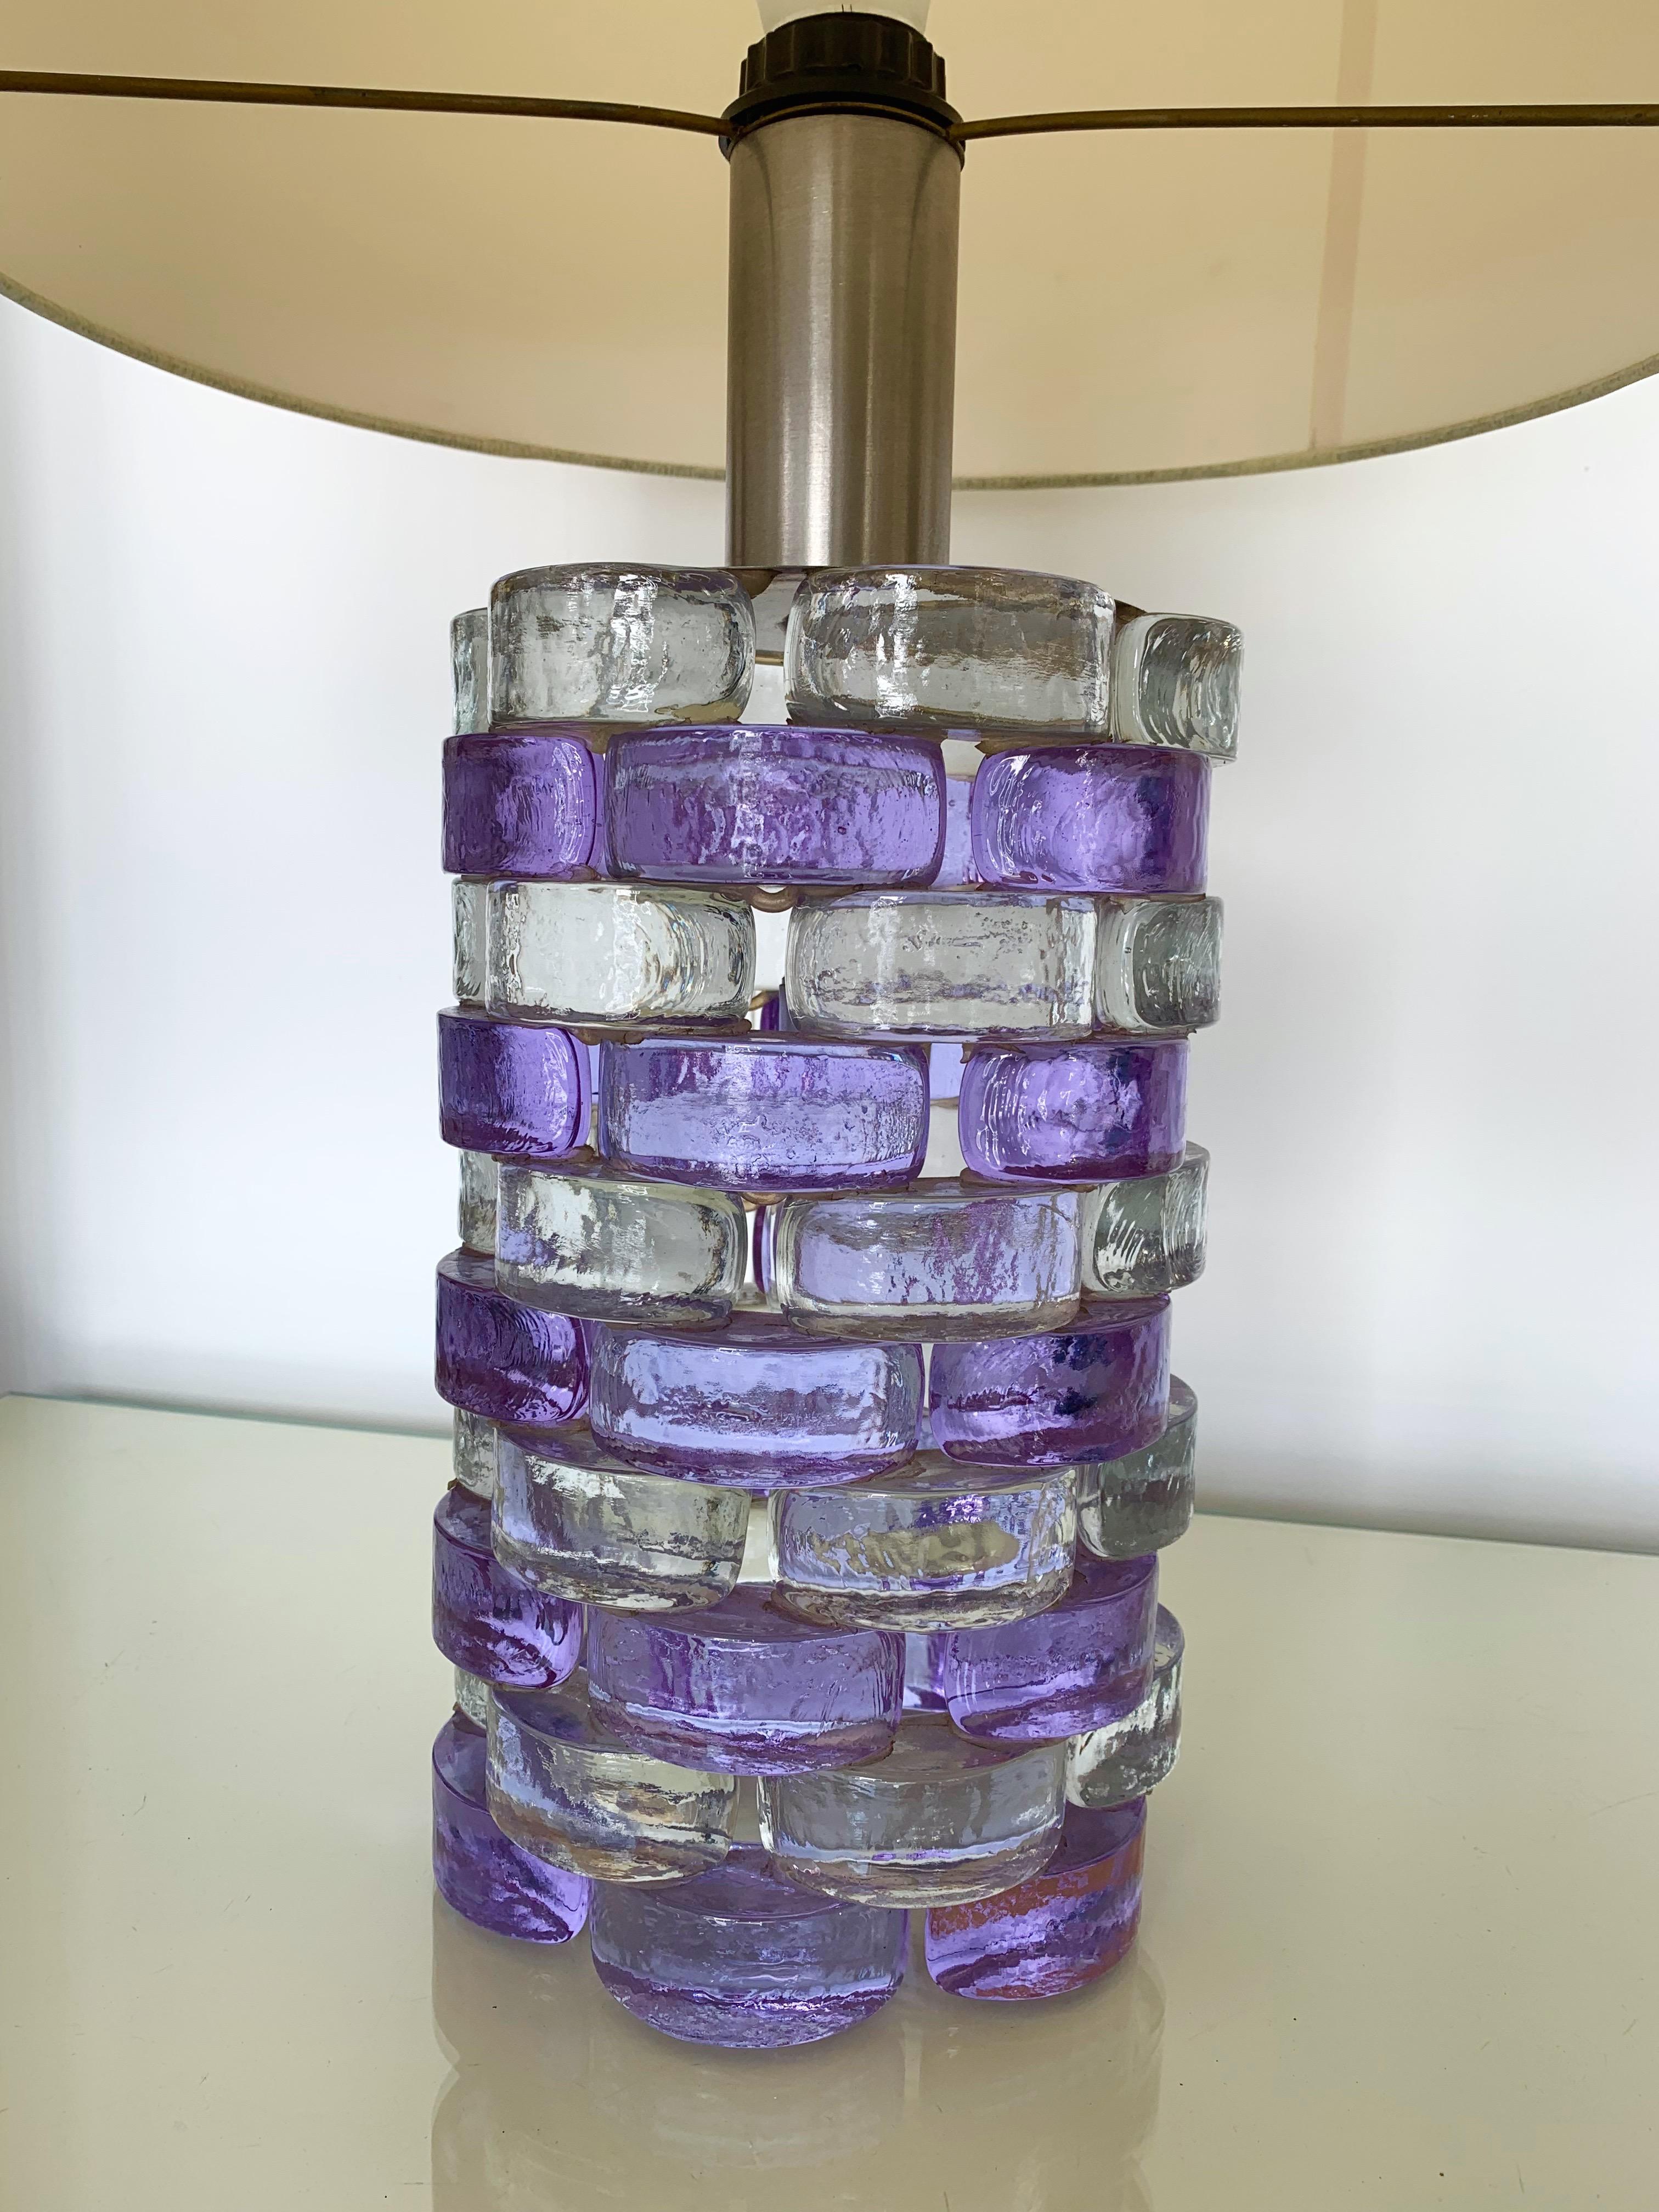 Rare model of purple pink and clear pressed glass lamps, stainless steel, interior lighting of lamp bases by the manufacture Biancardi & Jordan Arte in Verona. Height top of bulb holder 40cms. Famous manufacture like Poliarte, Mazzega Murano,